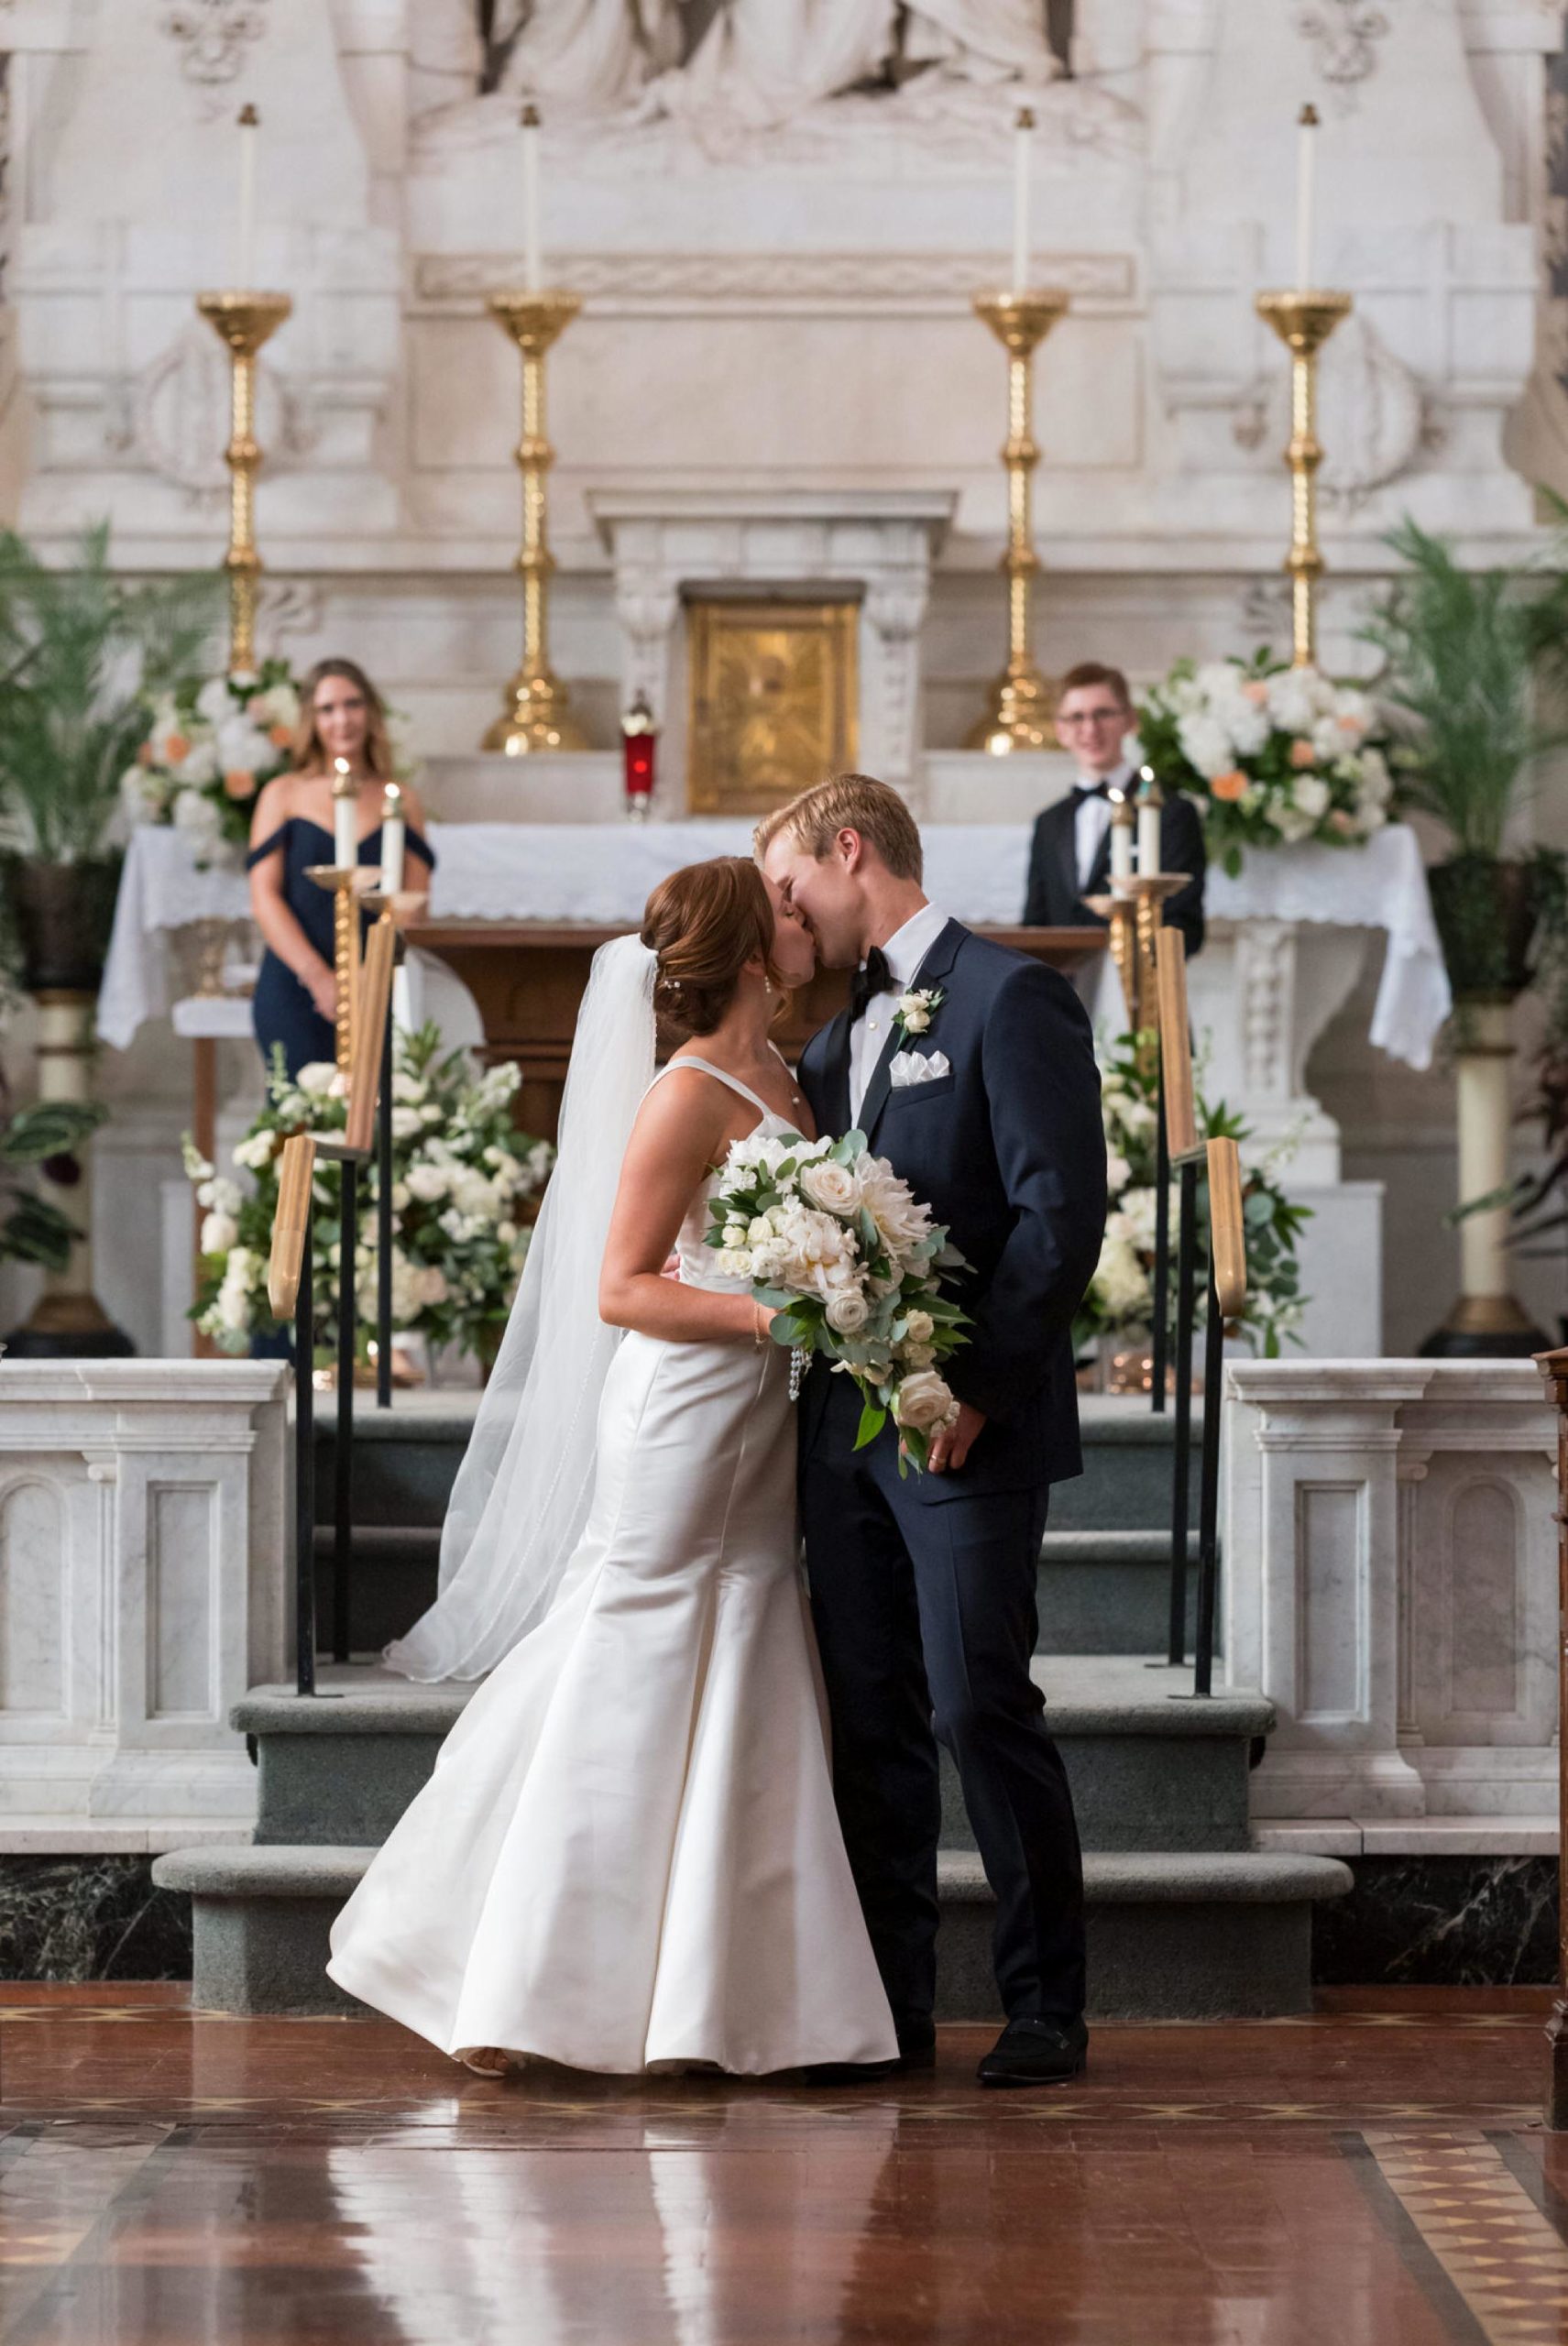 A bride and groom kiss in the aisle at their wedding at Saints Peter and Paul Jesuit Church in Detroit.  